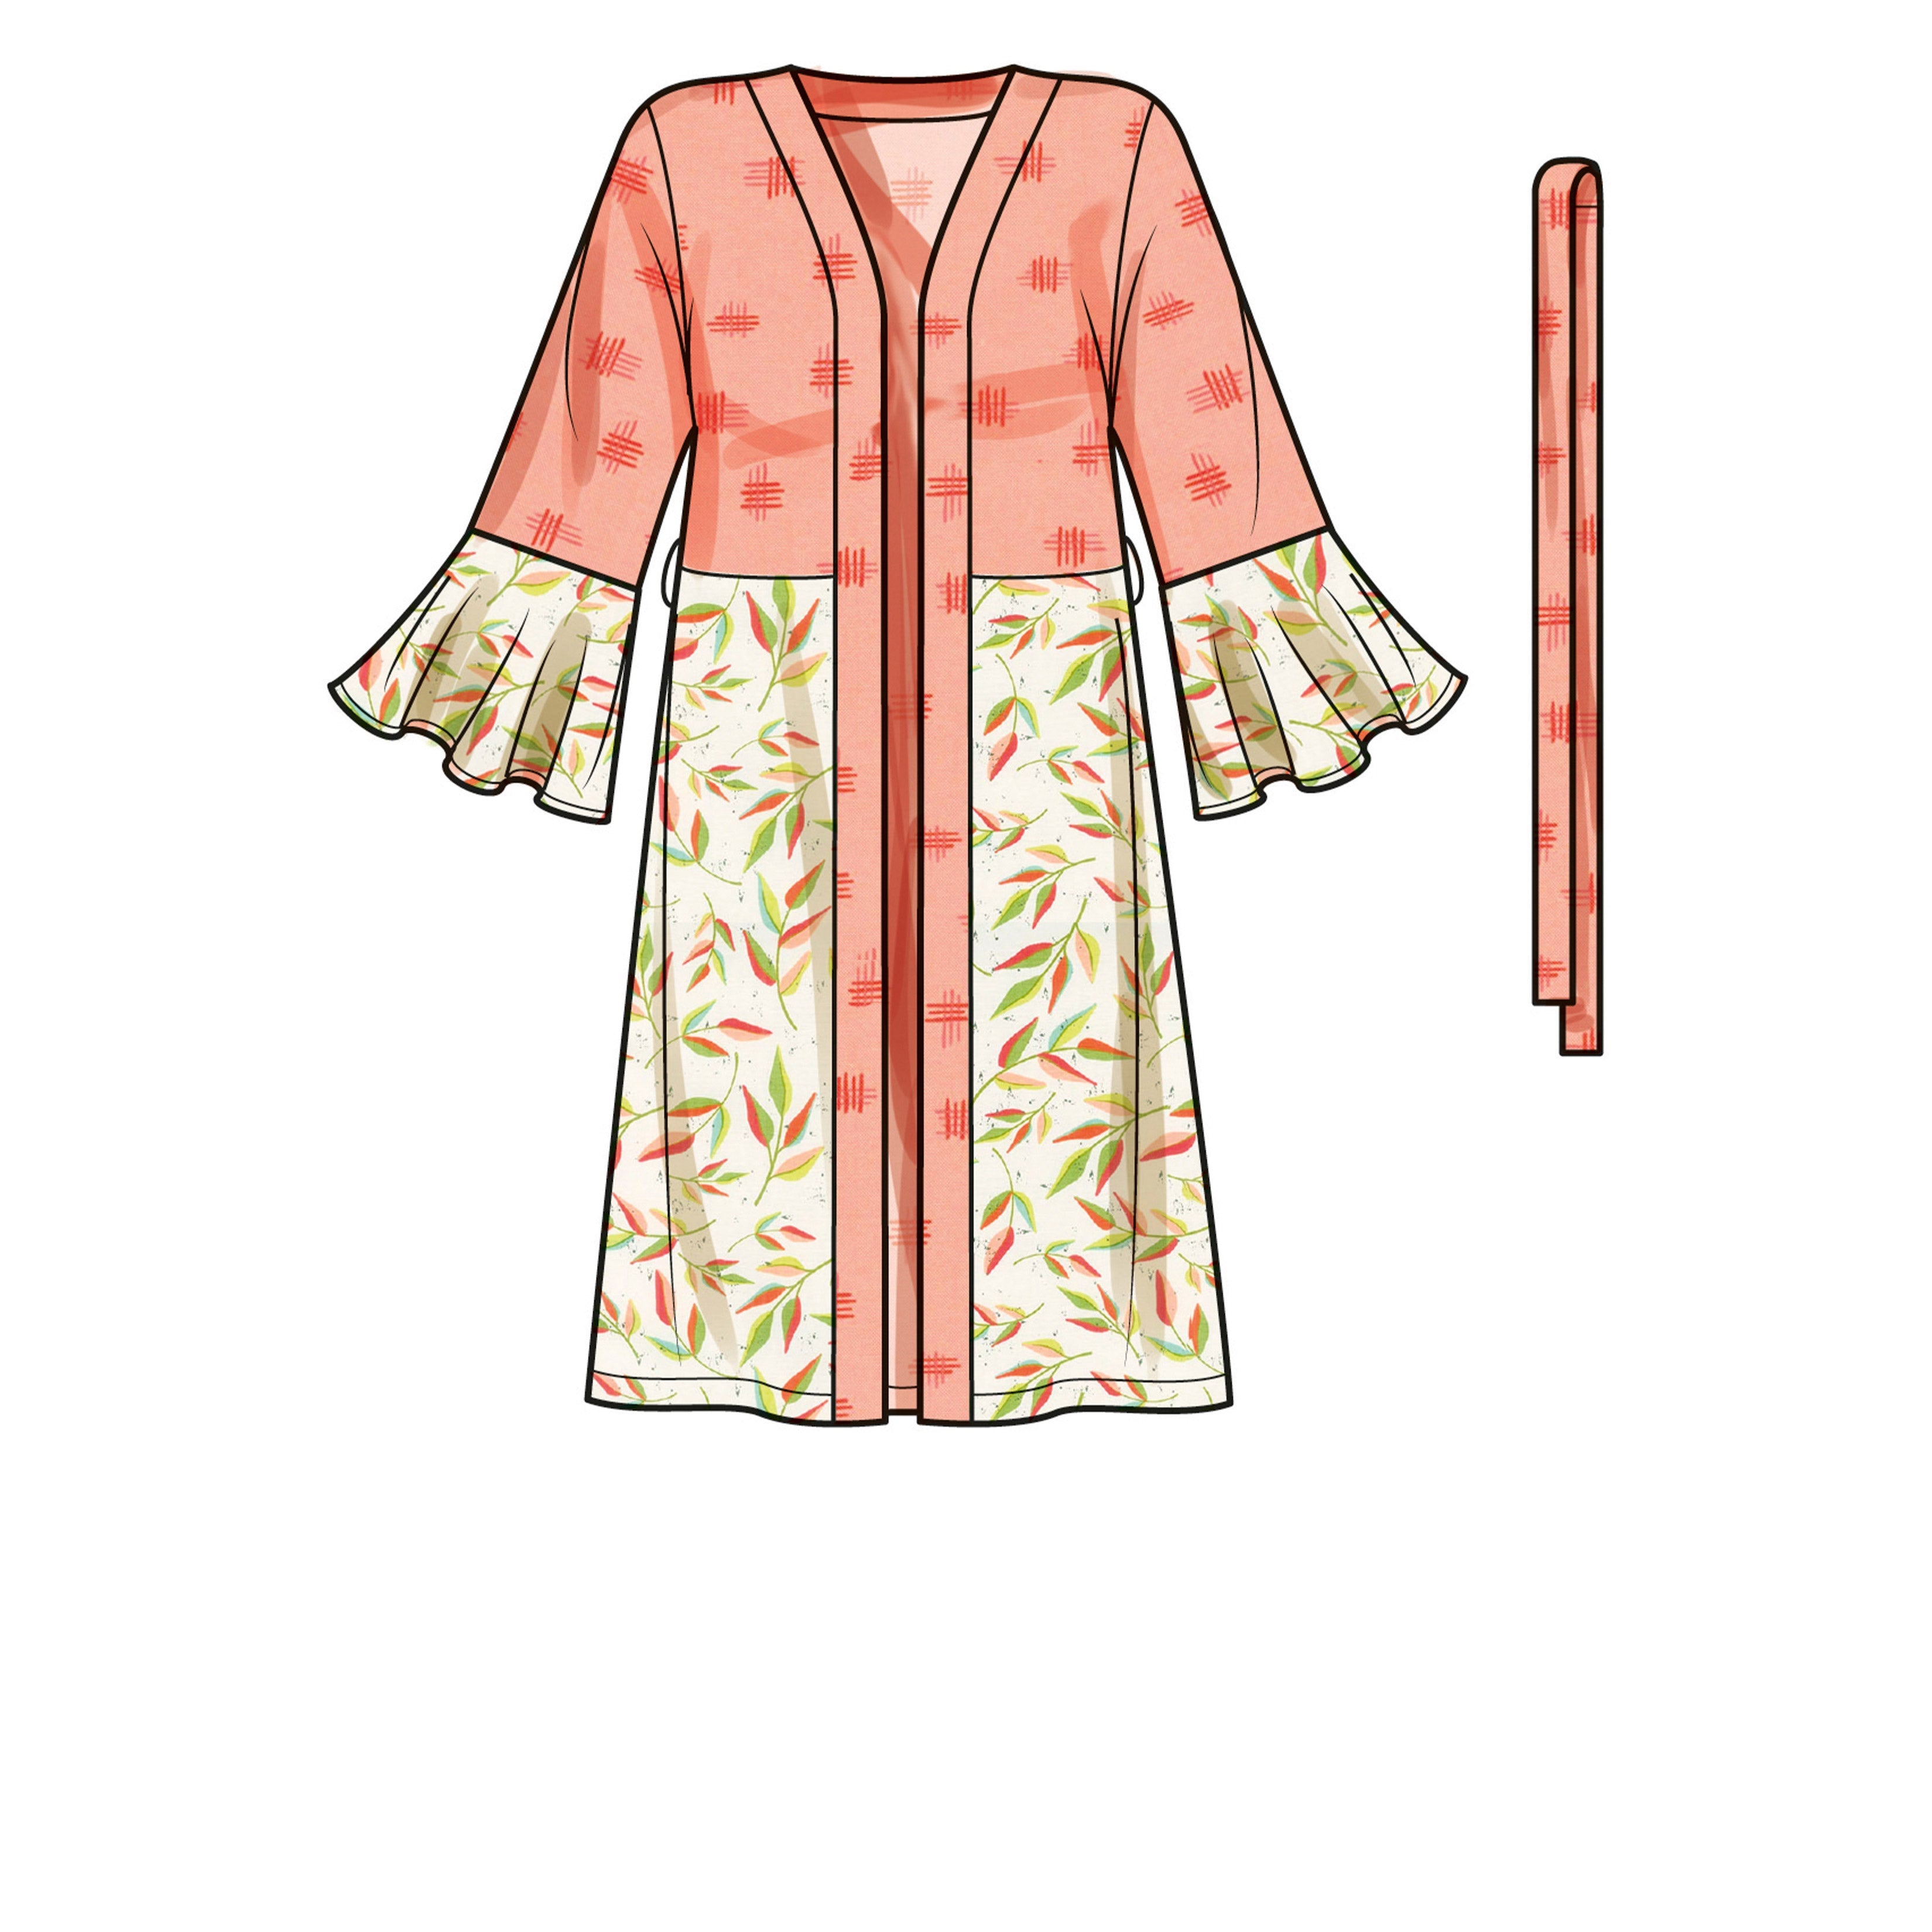 Simplicity Sewing Pattern 9603 Women's Caftans and Wraps from Jaycotts Sewing Supplies